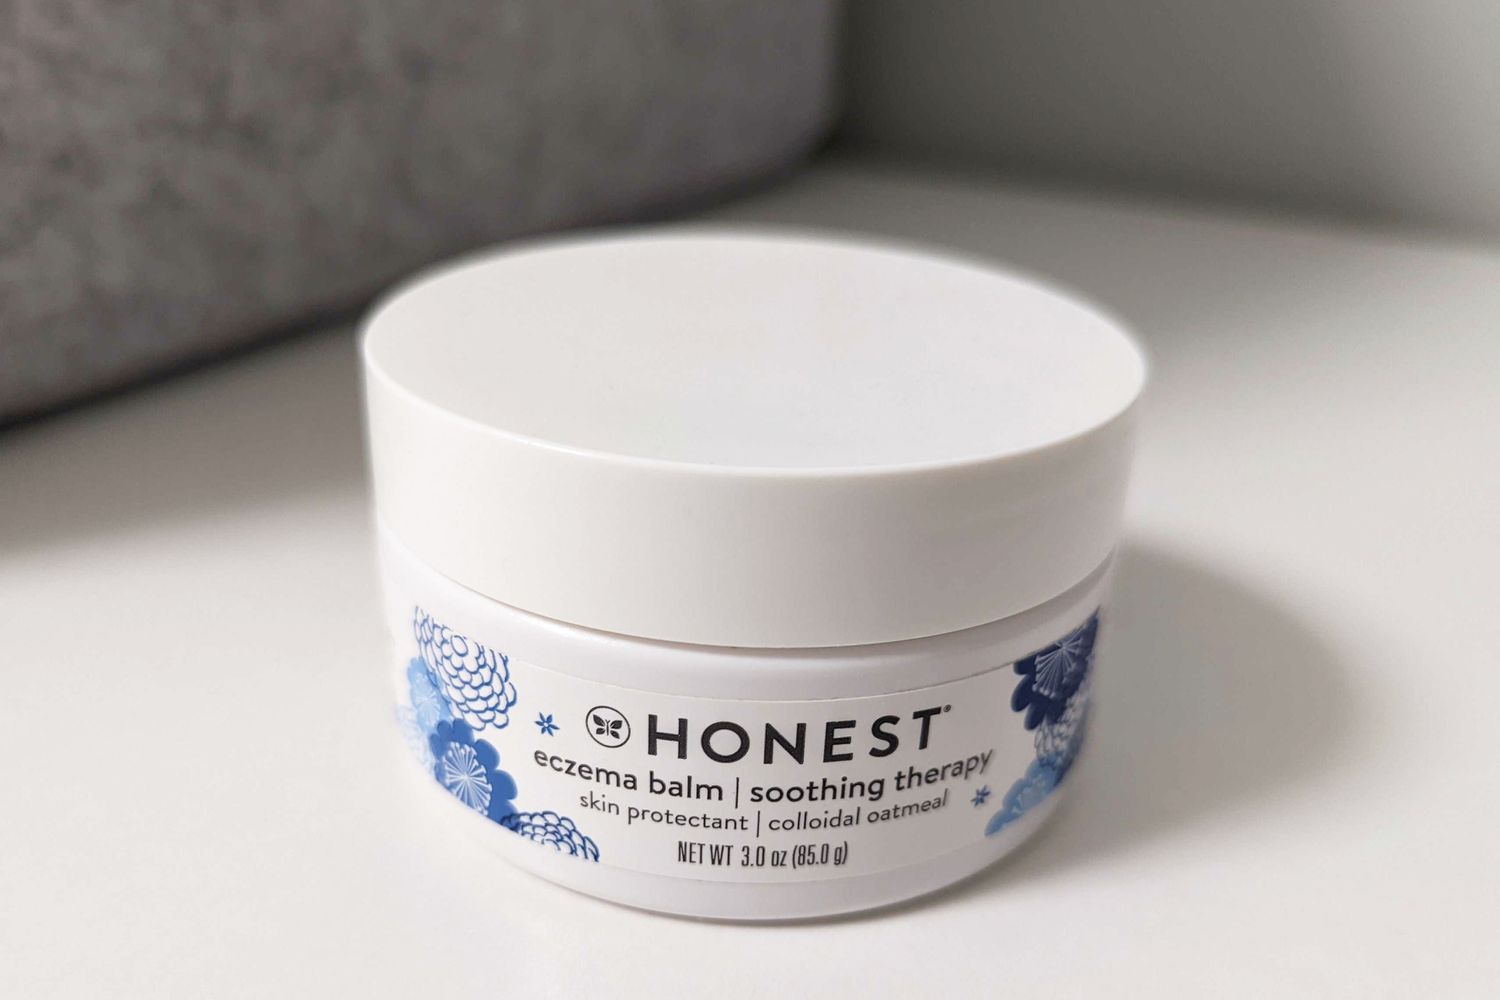 Tub of Honest Eczema Balm displayed on a white counter